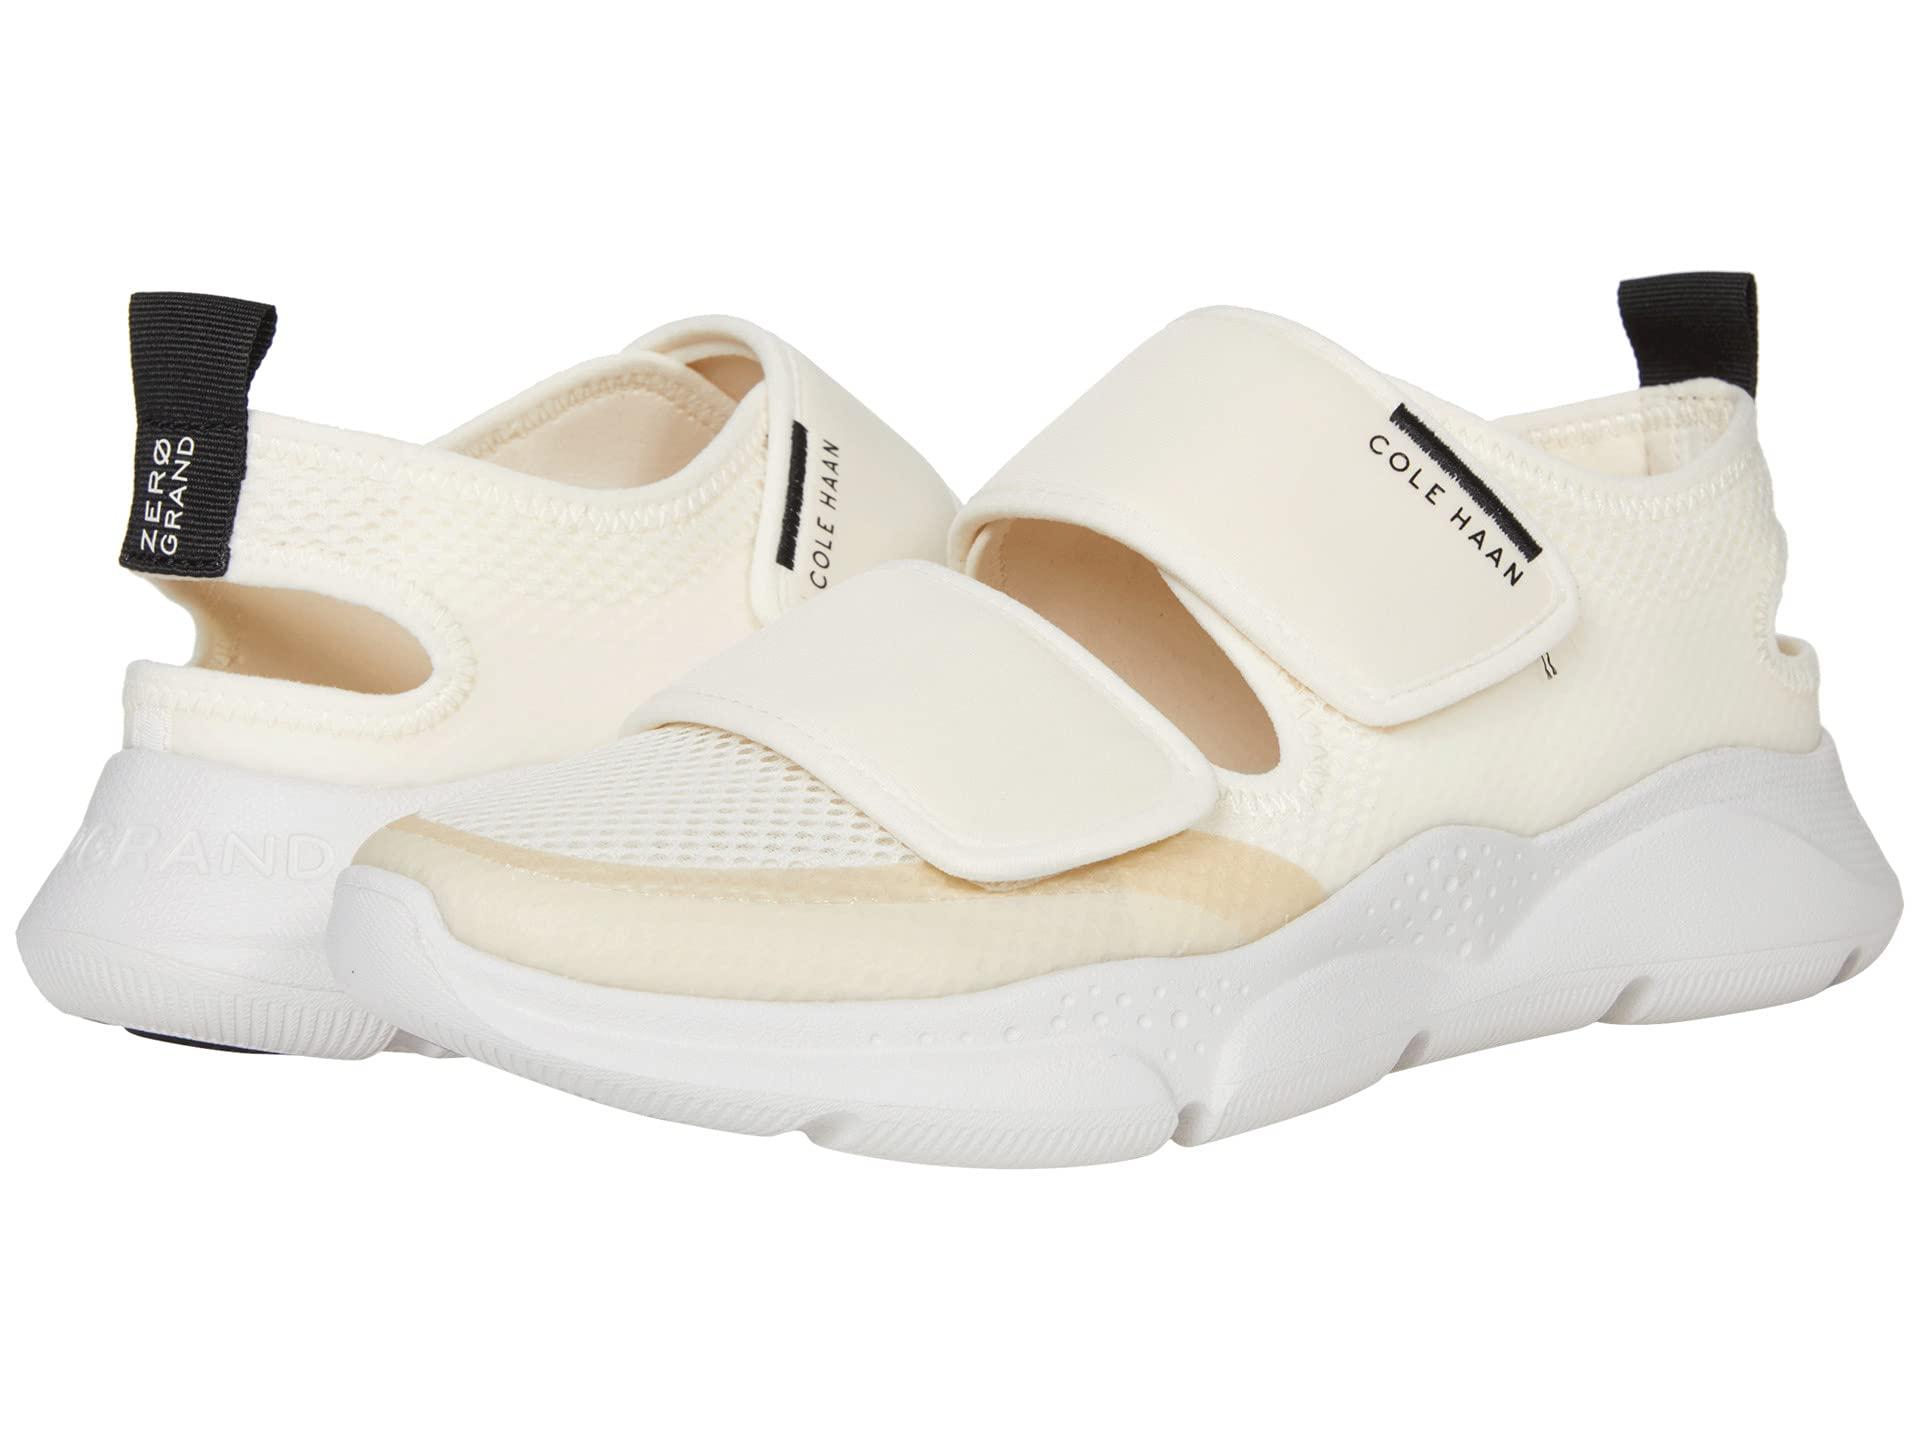 Cole Haan Zerogrand Radiant Double-band Sport Sandal in White | Lyst